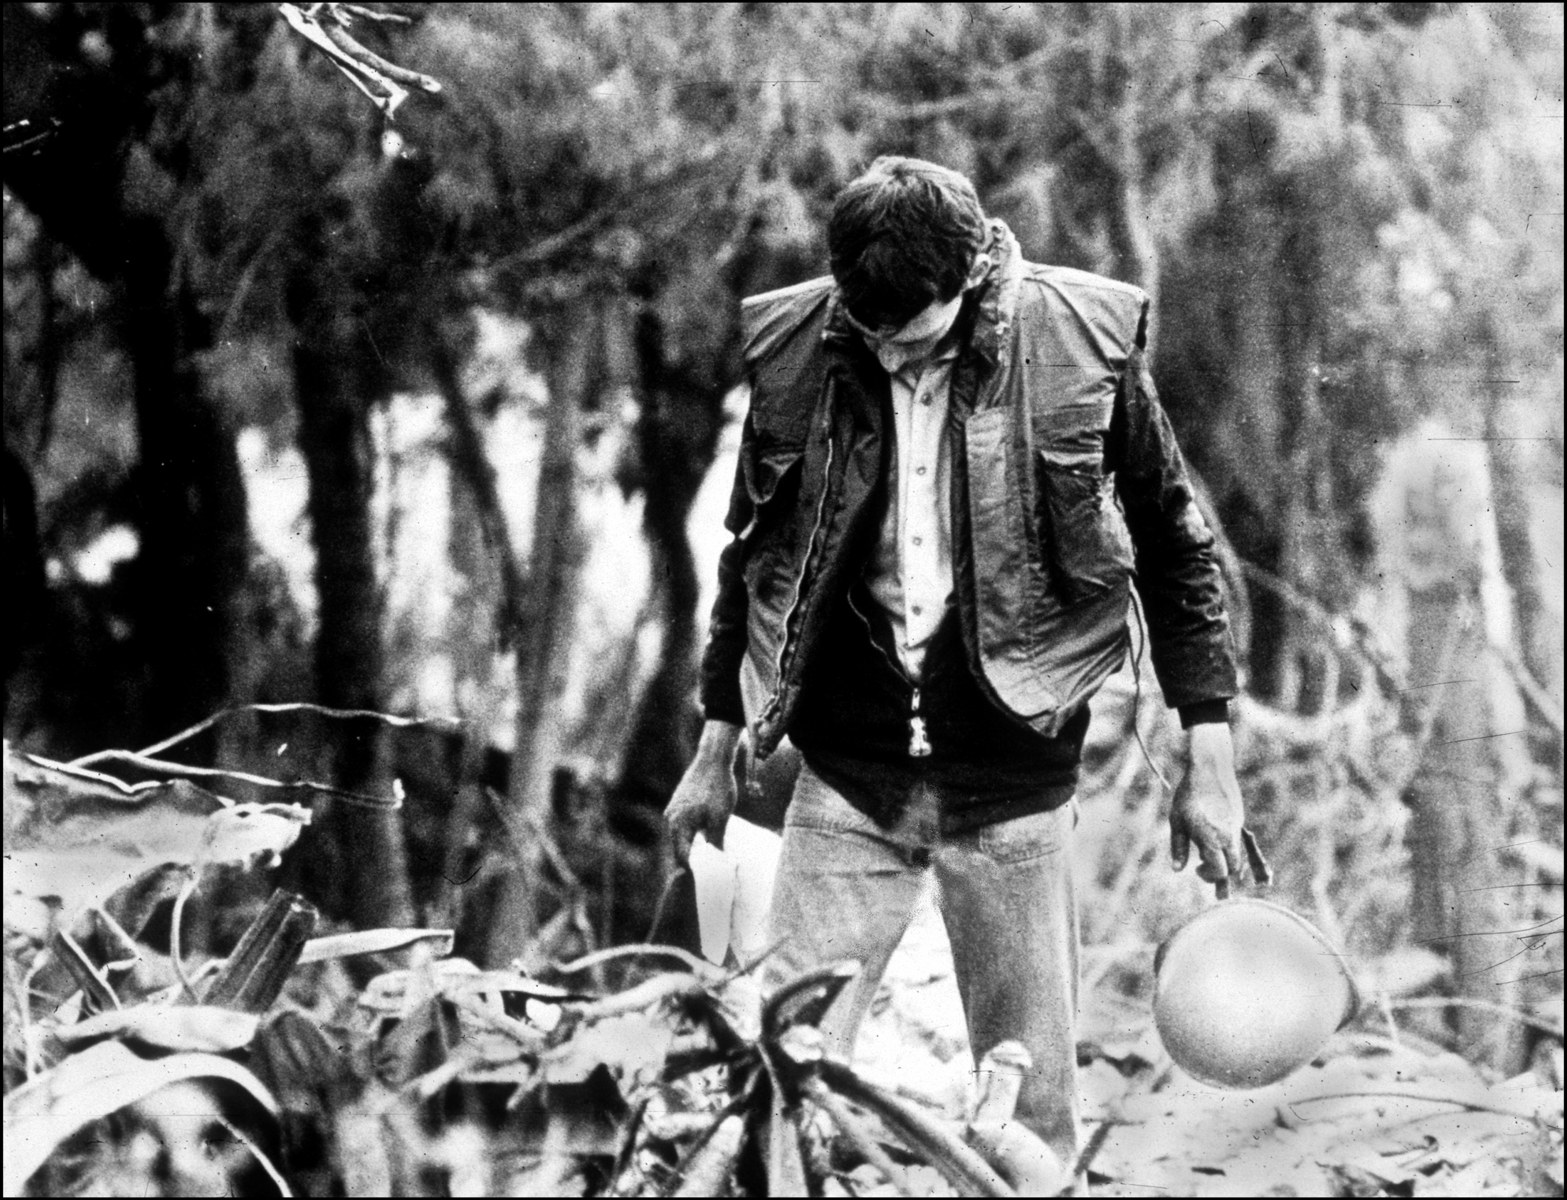 Navy Seabee searches blt bomb site 1983. : USMC in Beirut 1982-1983 : BILL FOLEY 